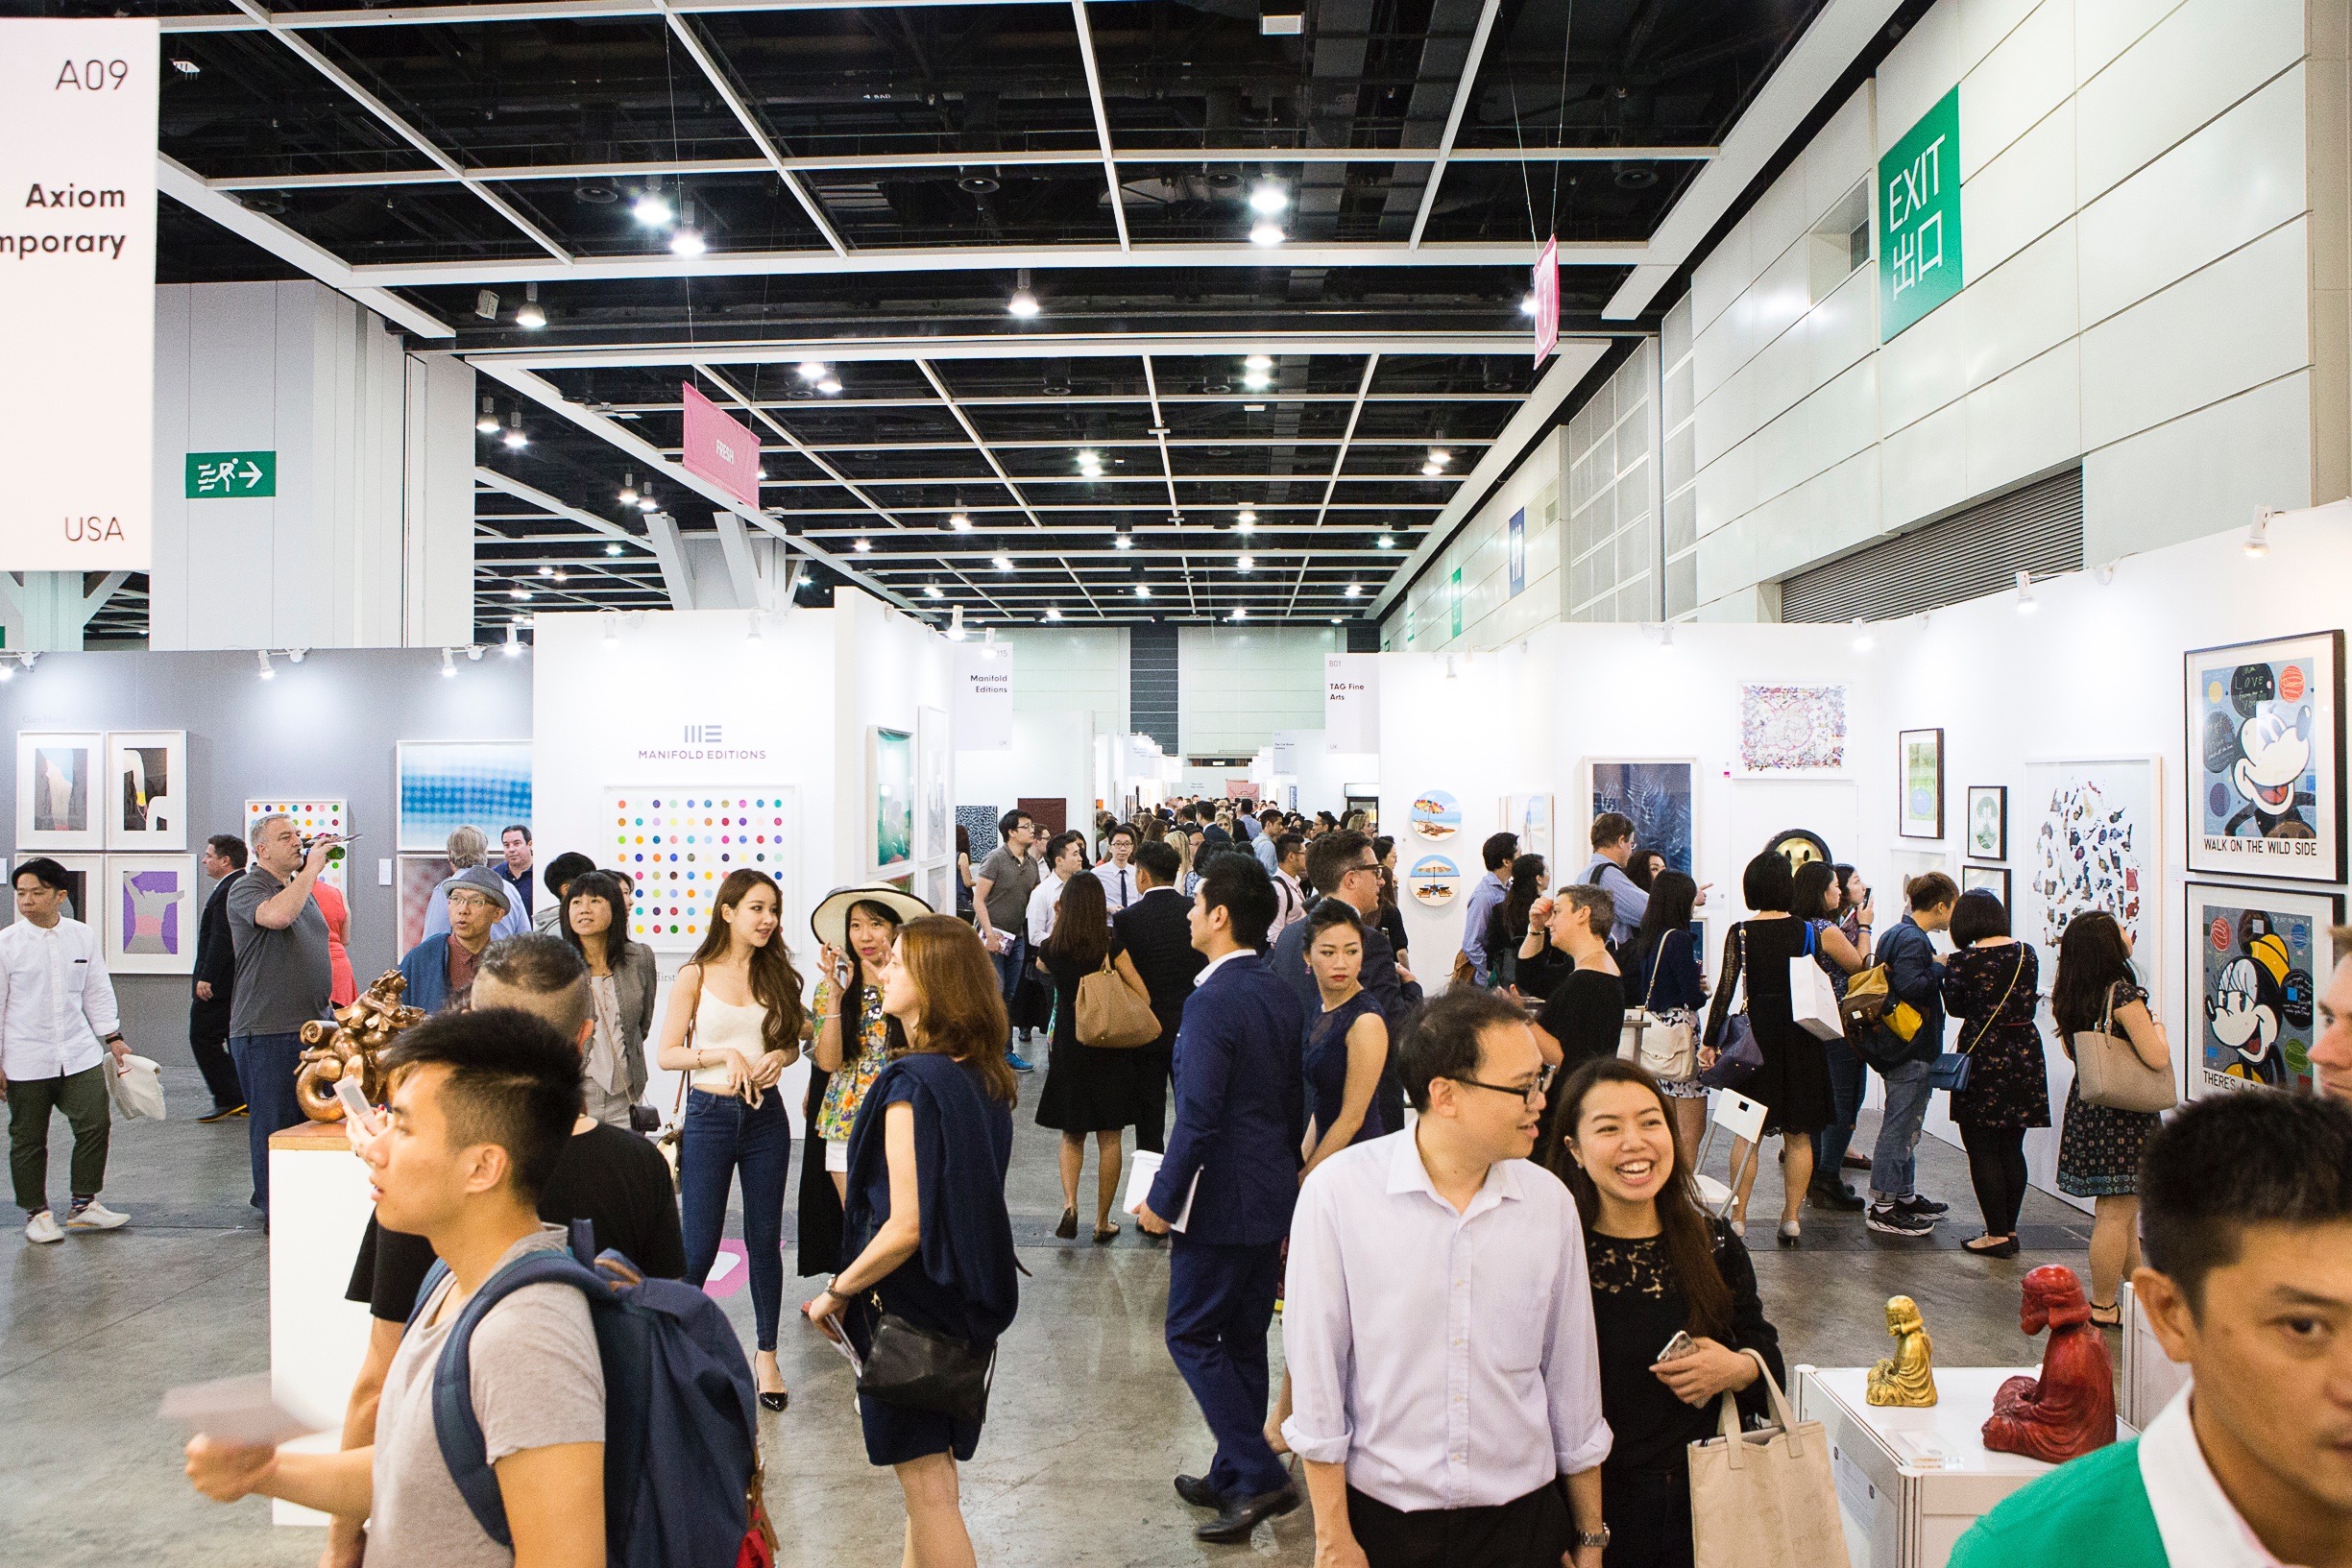 The Affordable Art Fair will see 25,000 visitors though its doors